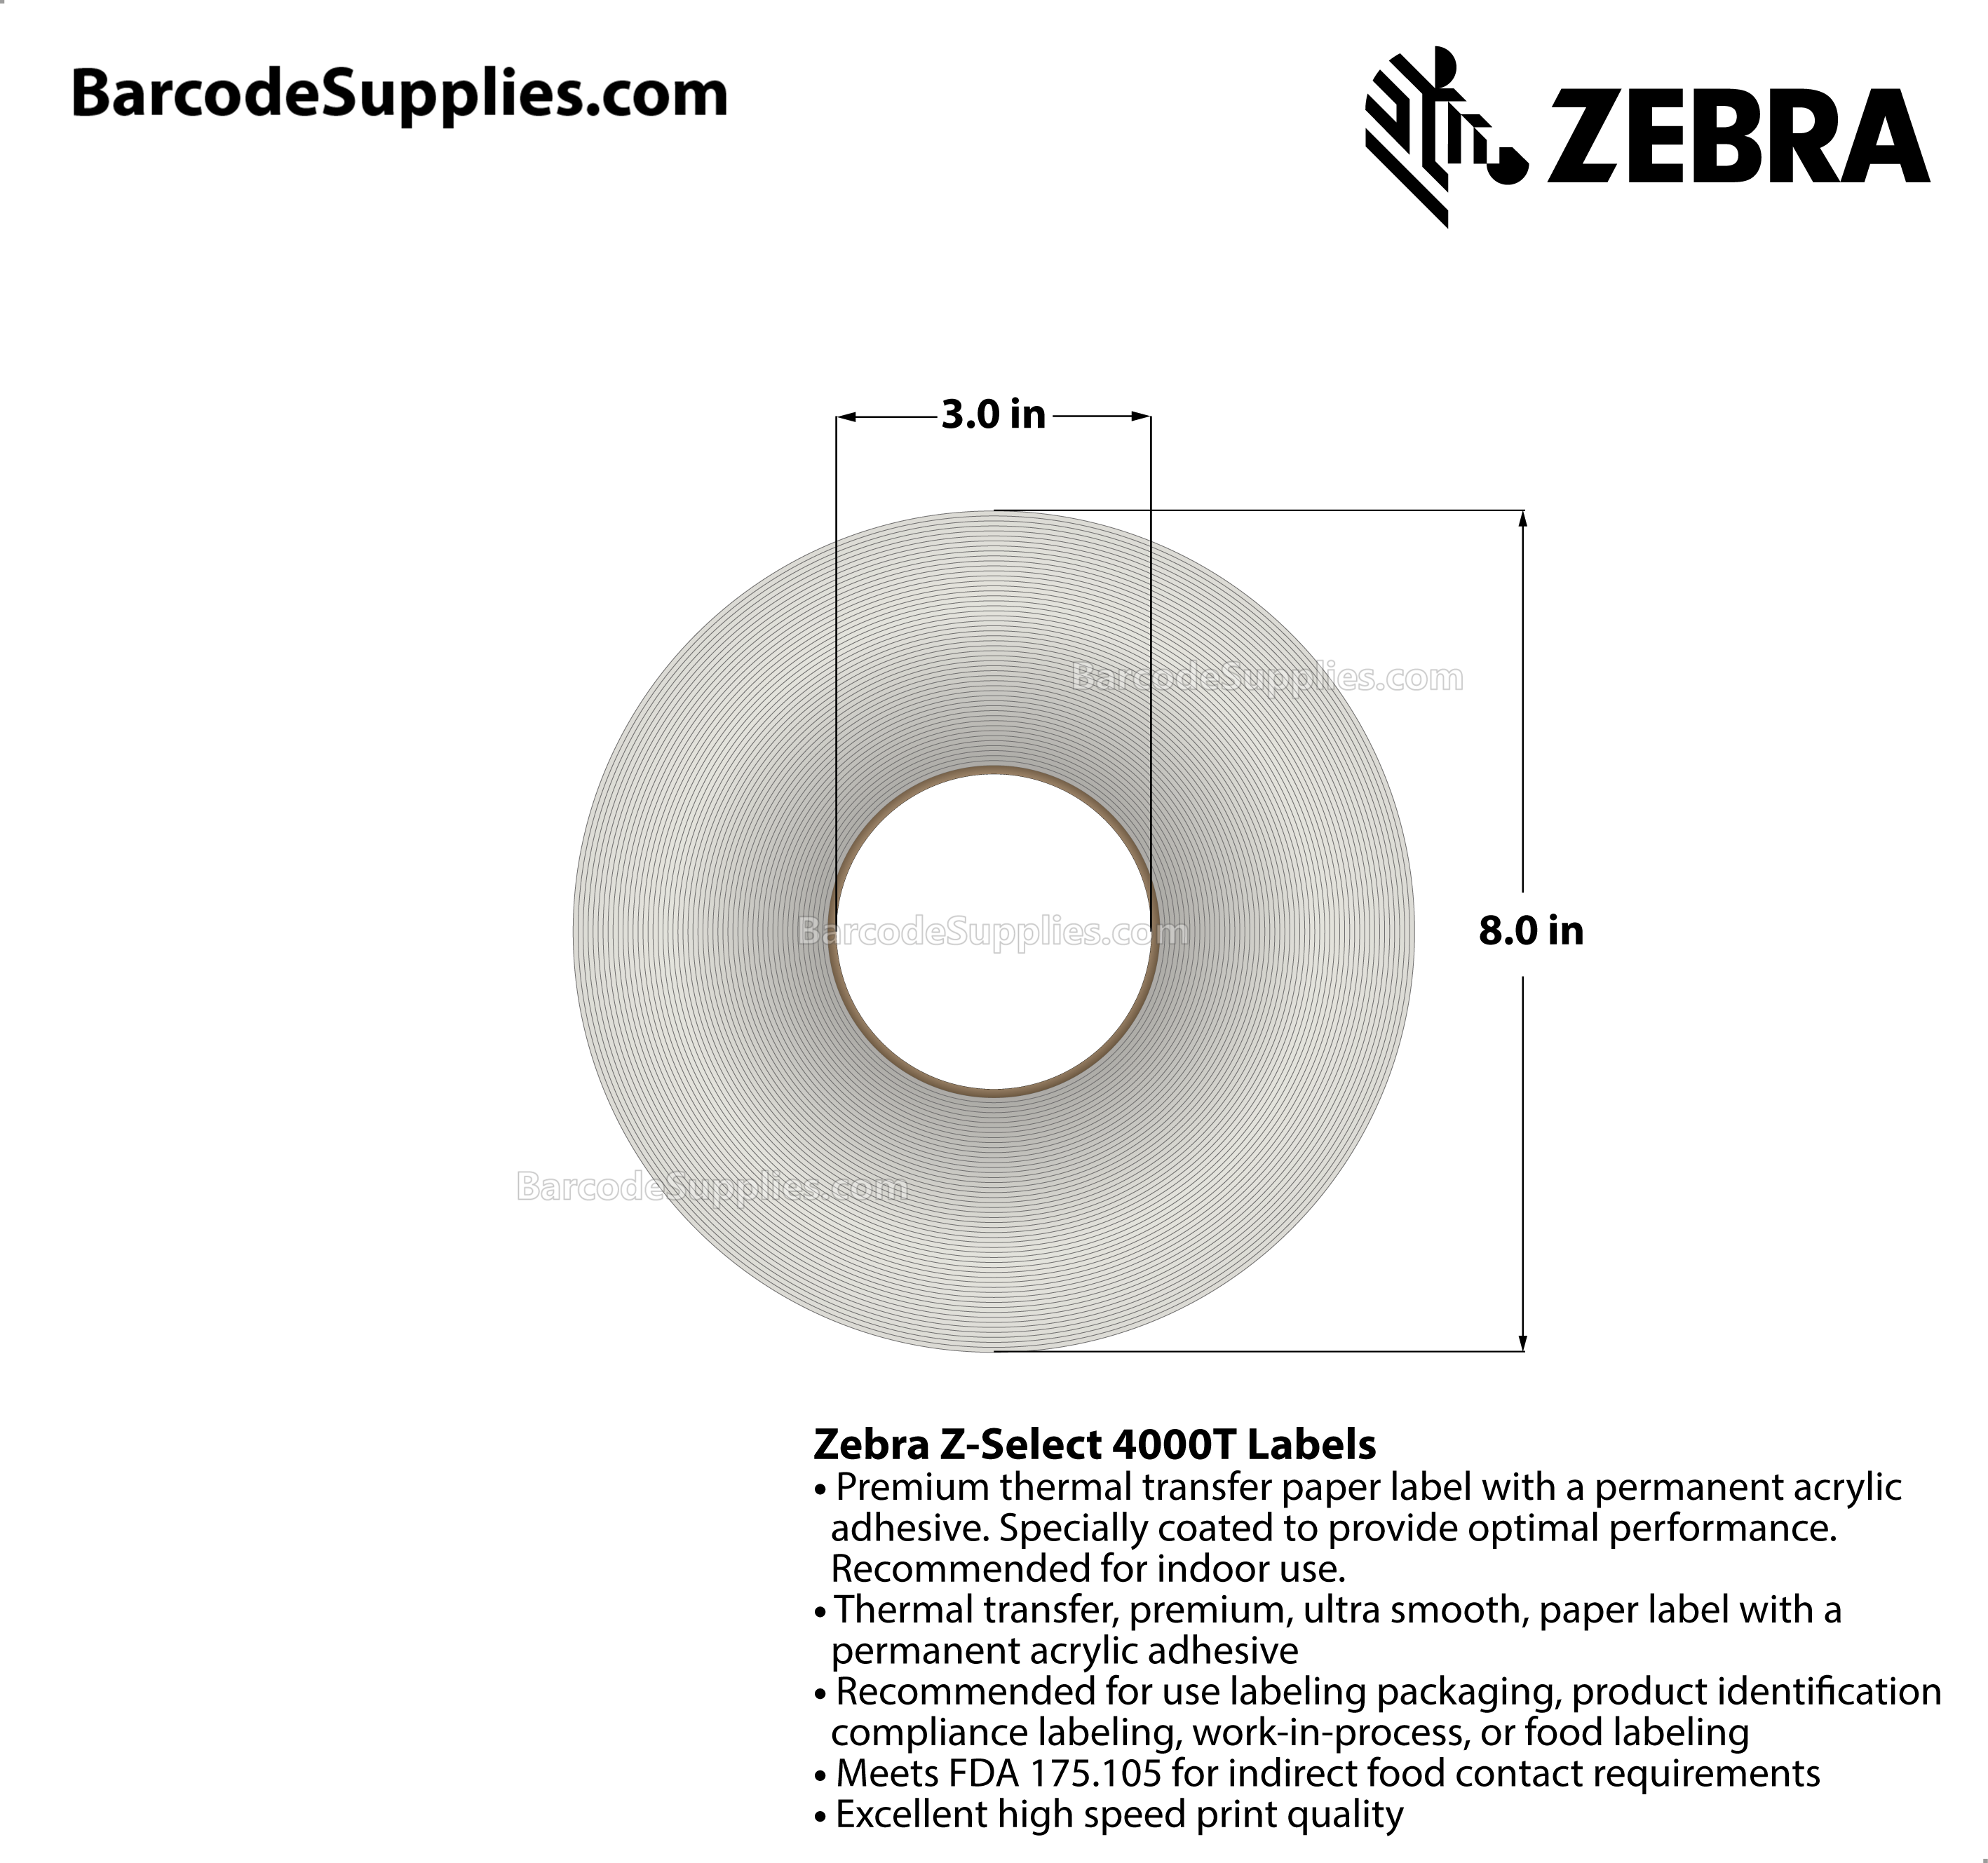 4 x 6 Thermal Transfer White Z-Select 4000T Labels With Permanent Adhesive - Not Perforated - 950 Labels Per Roll - Carton Of 4 Rolls - 3800 Labels Total - MPN: 72353